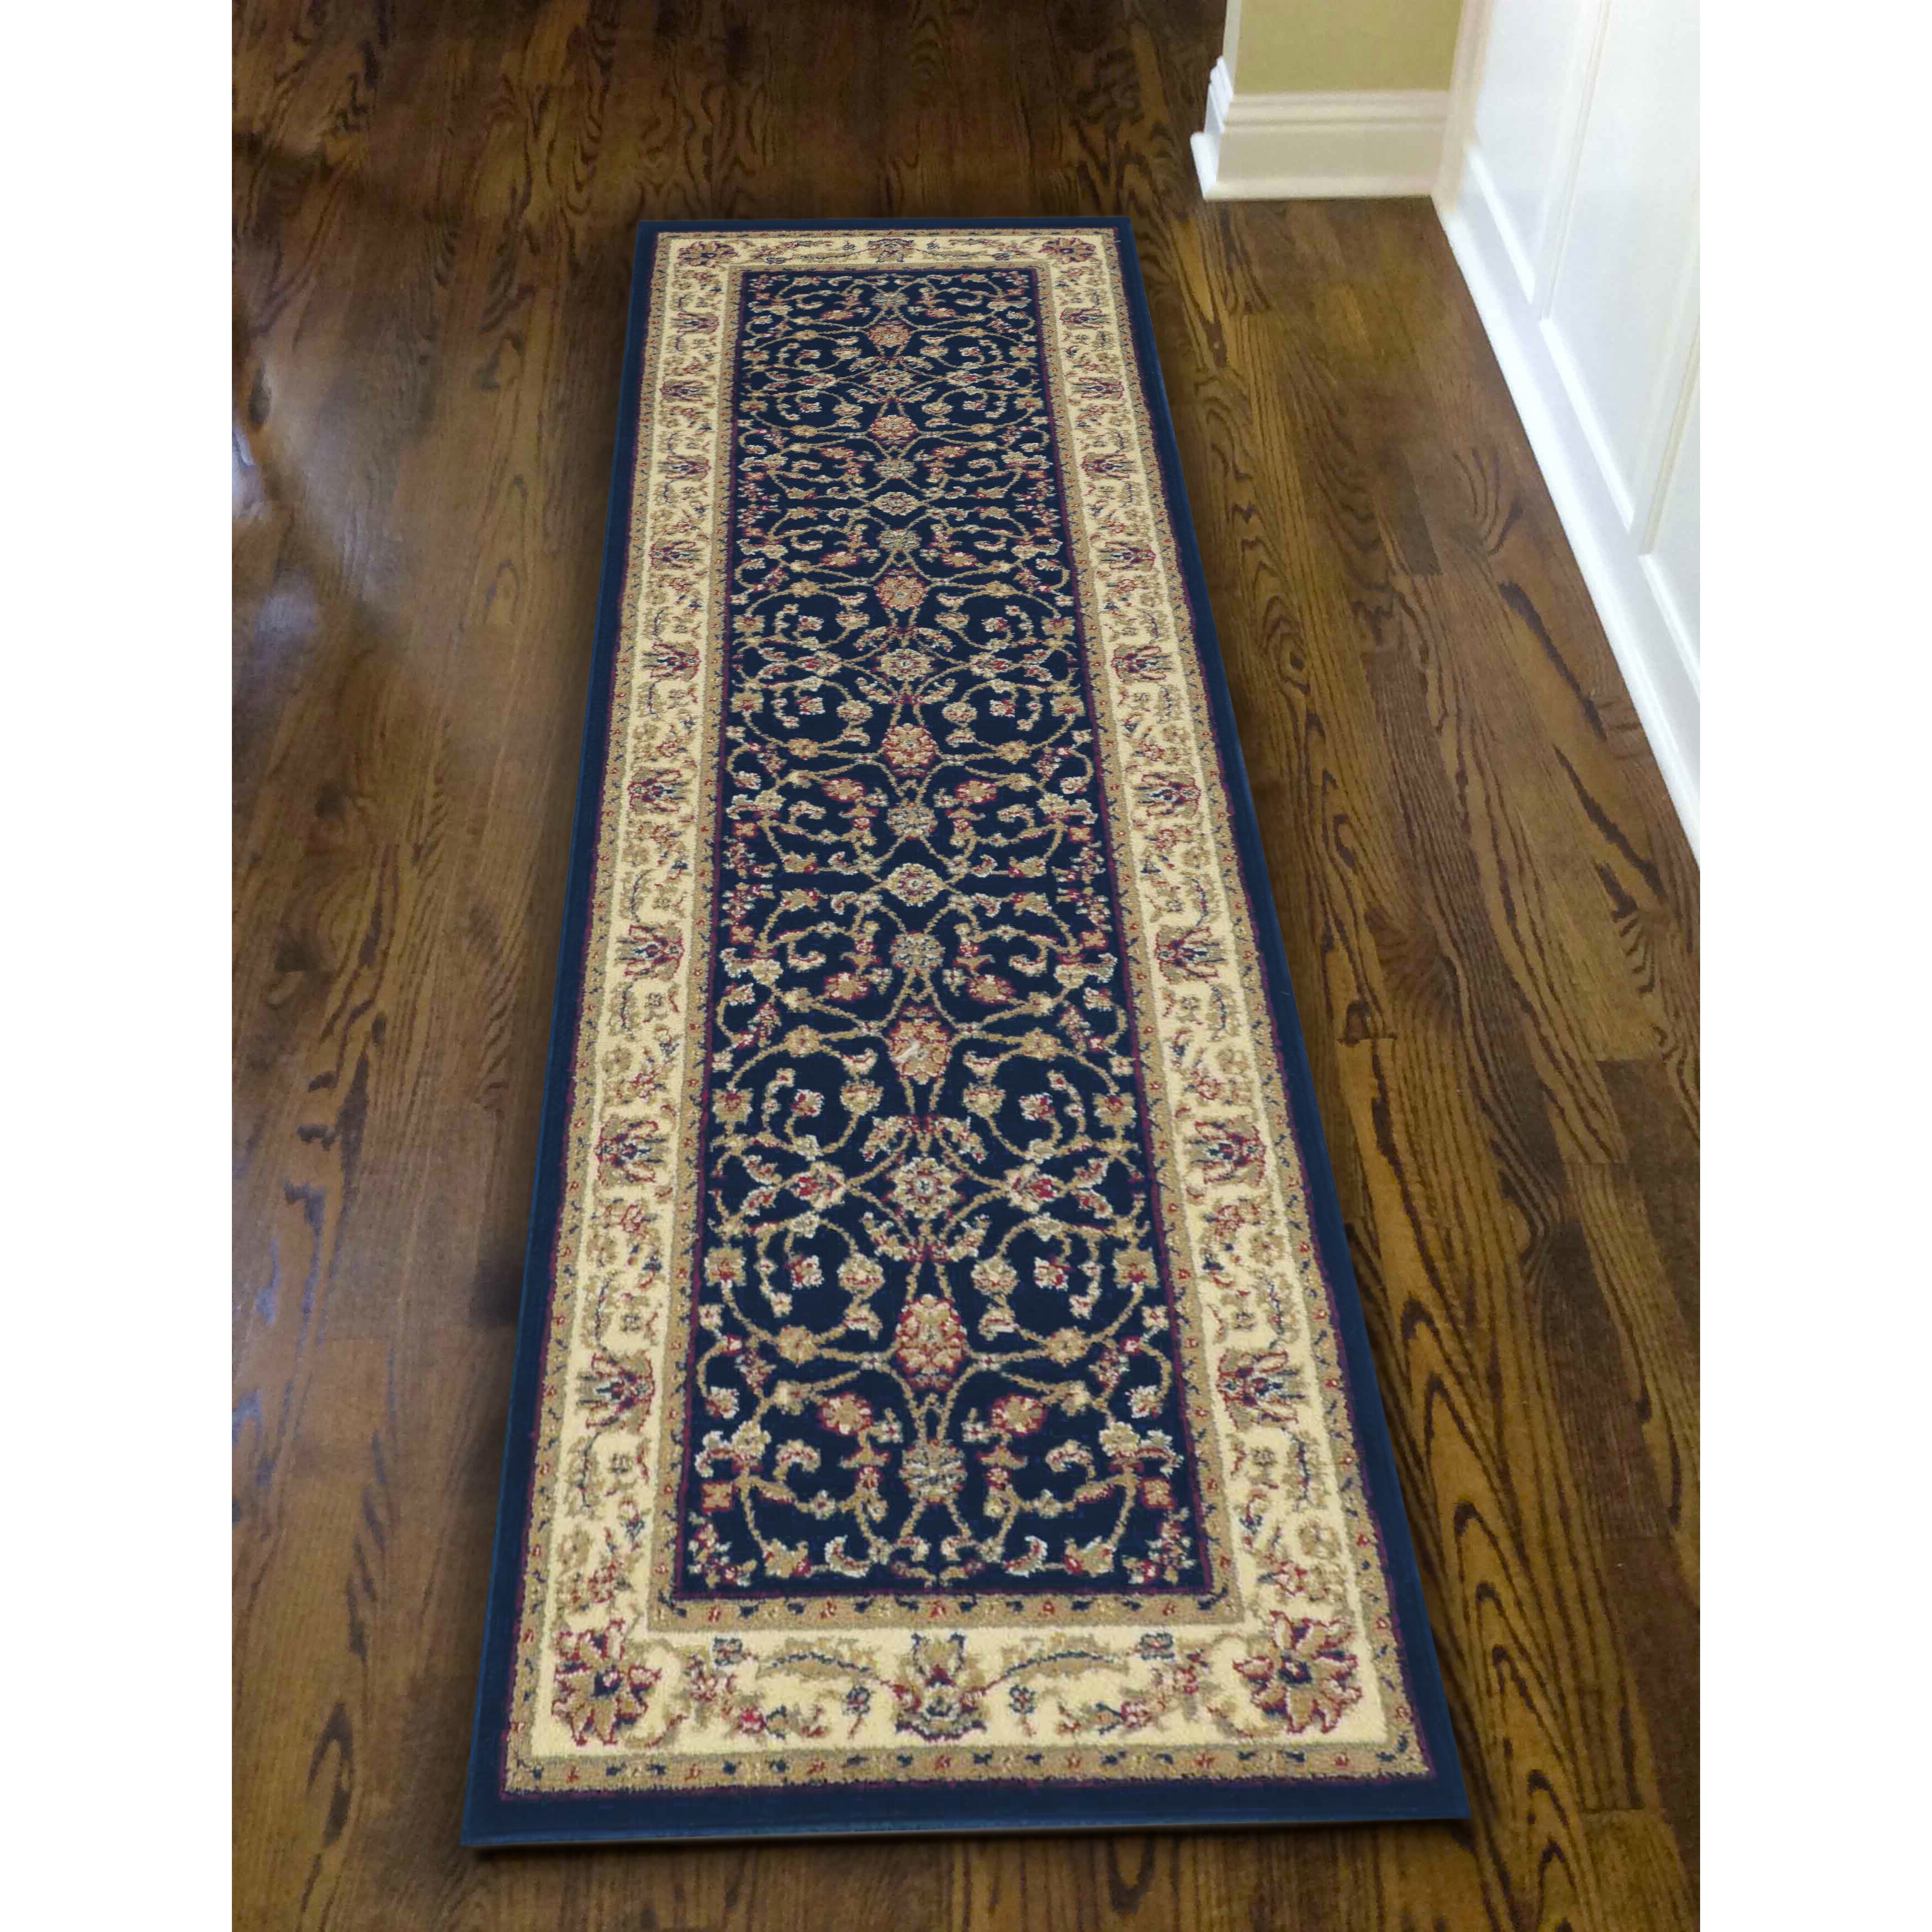 Buy Blue Oriental Area Rugs Online At Overstockcom Our Best Rugs